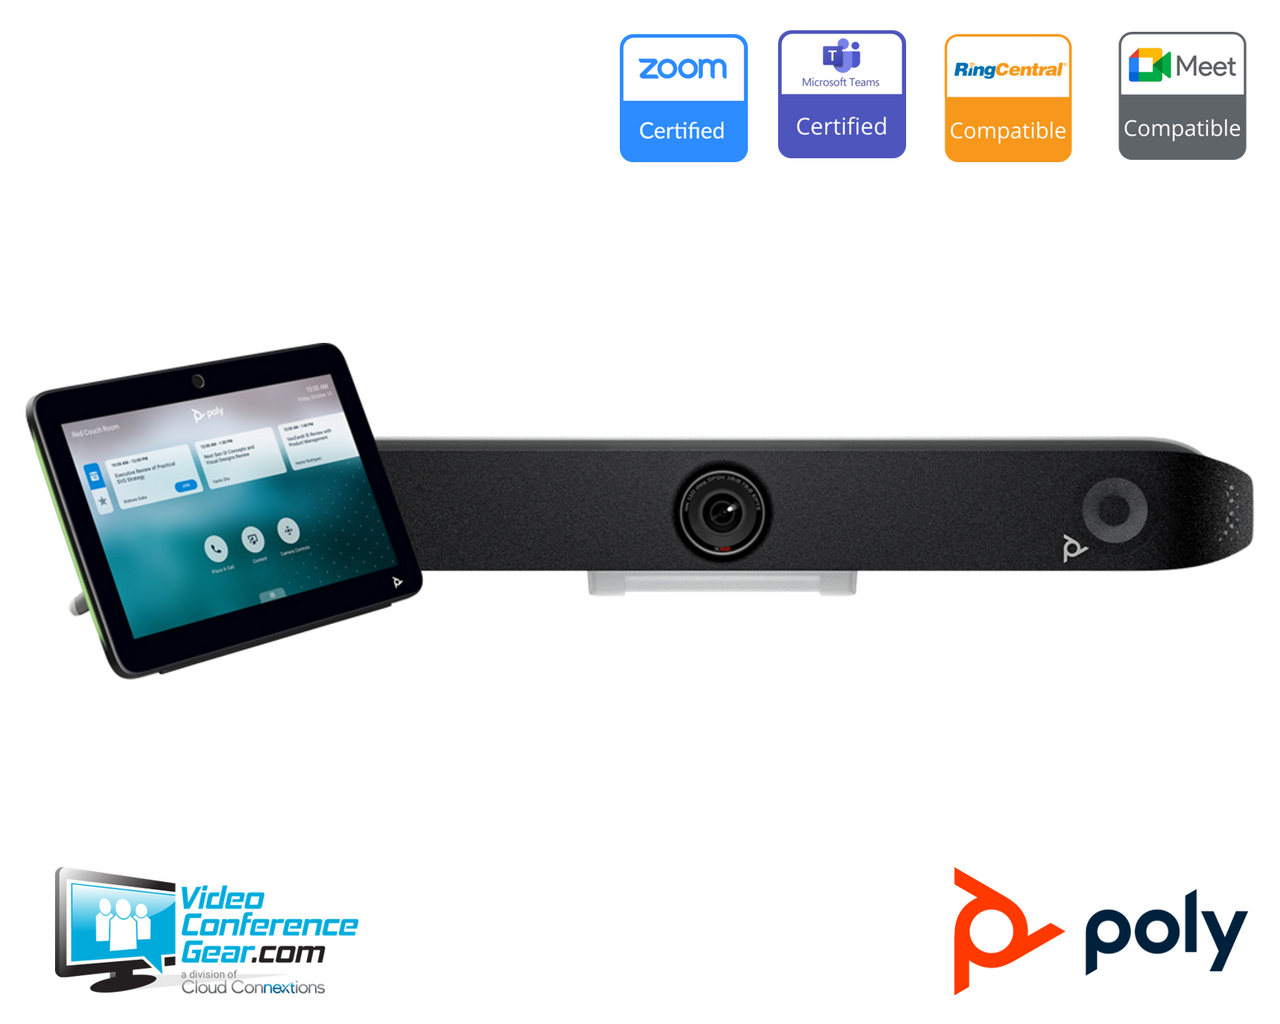 Poly Studio X52 Video Conferencing Appliance with Integrated Computer Designed for Use with Zoom Rooms, Microsoft Teams Includes TC10 Room Controller